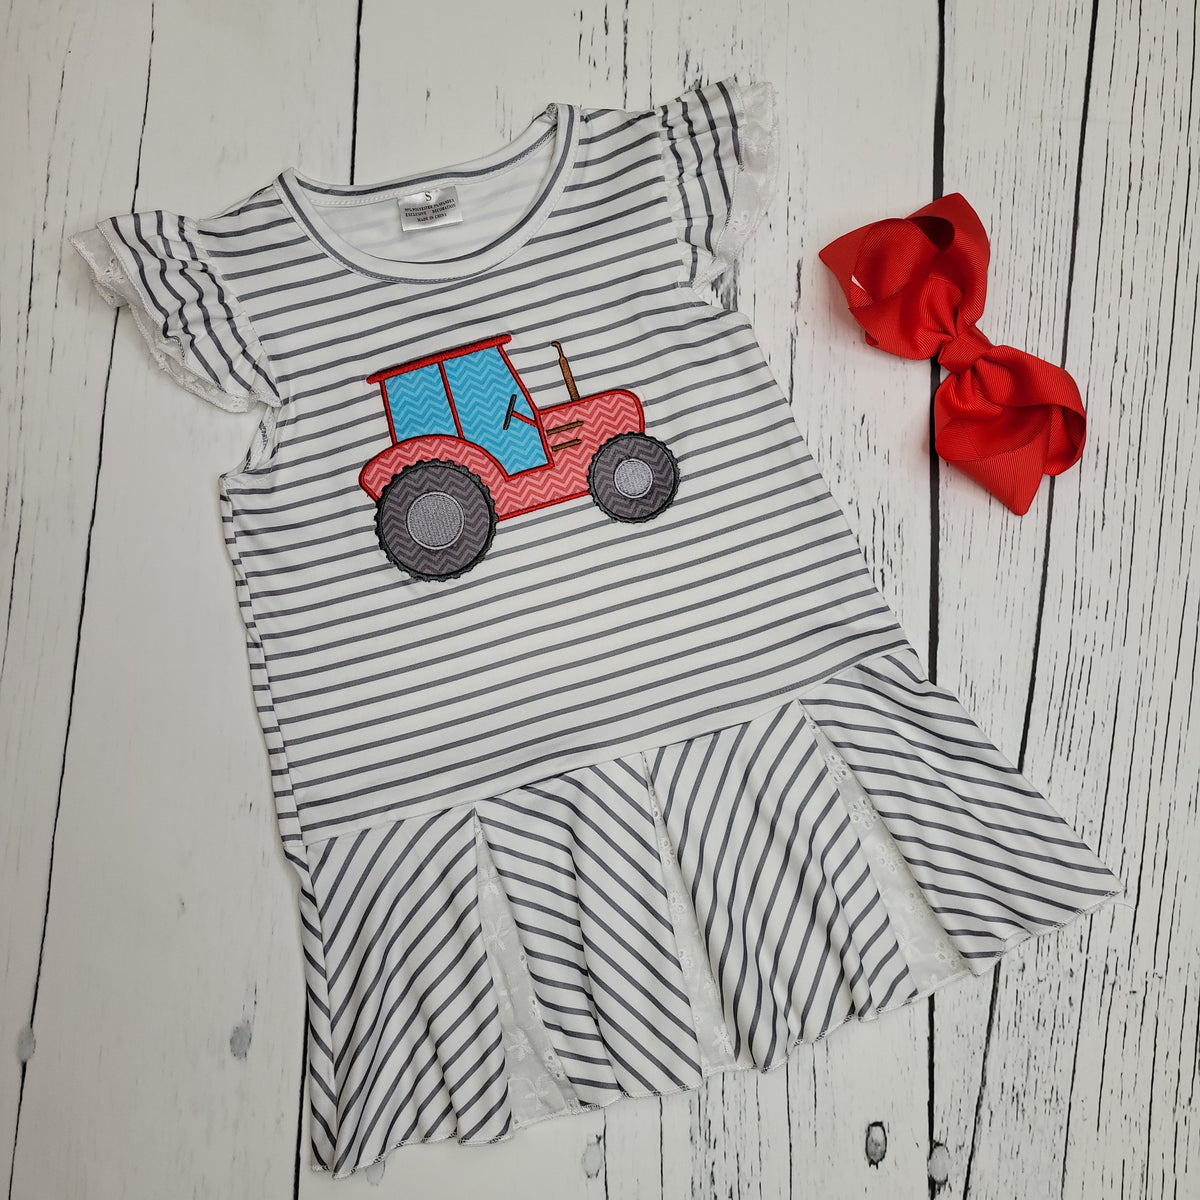 Big Red Tractor: Dress